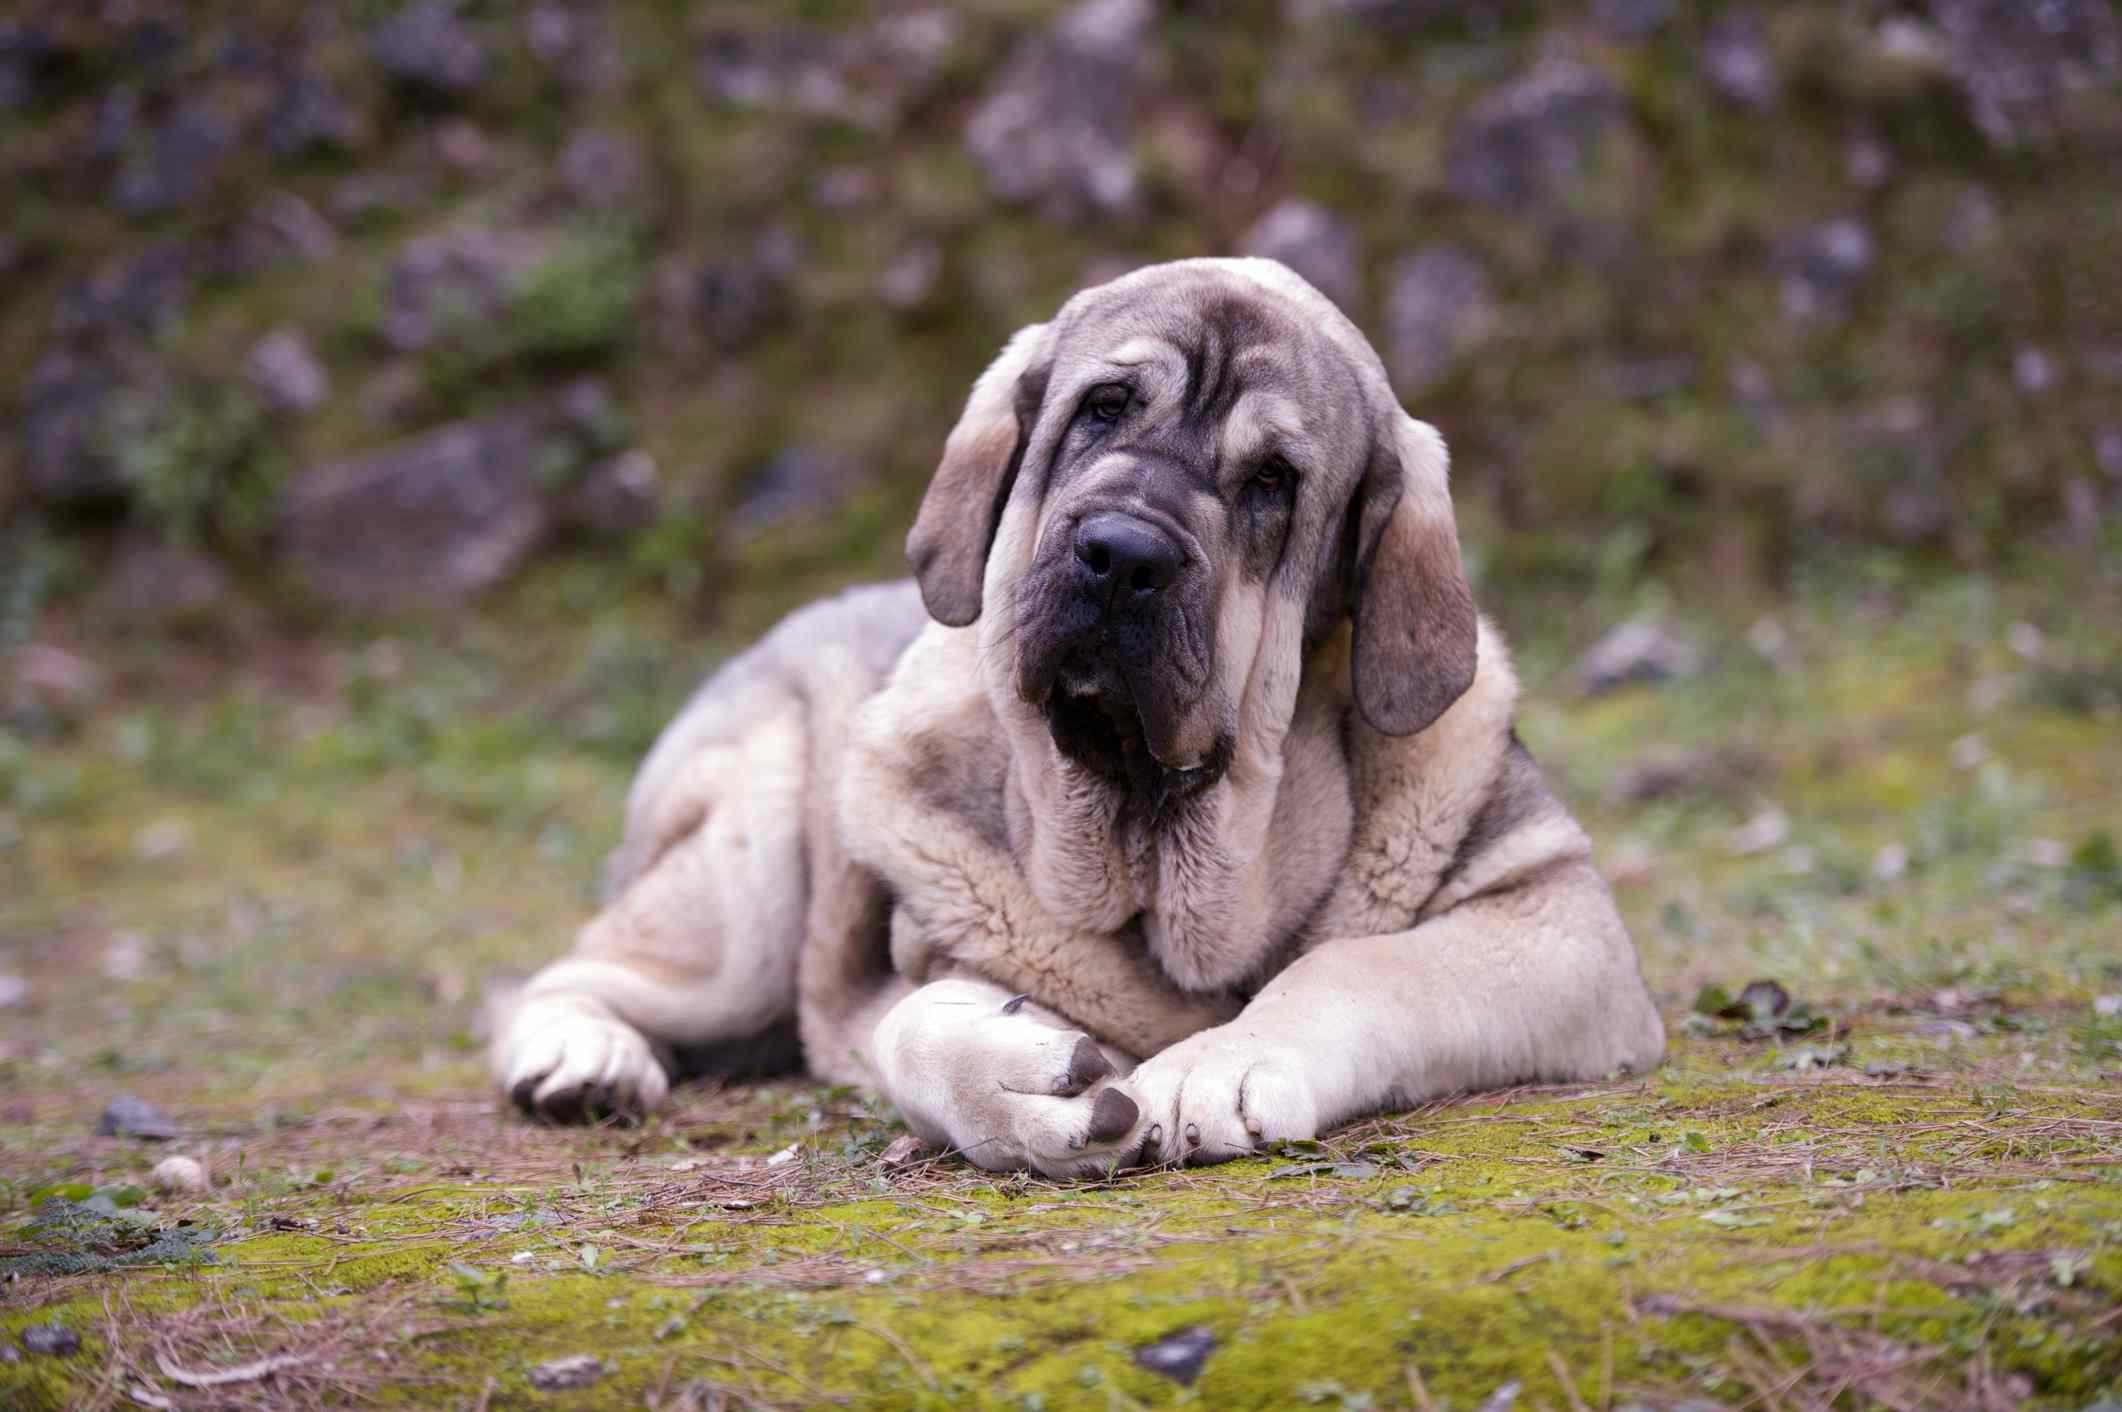 Young Spanish Mastiff lying on mossy groung